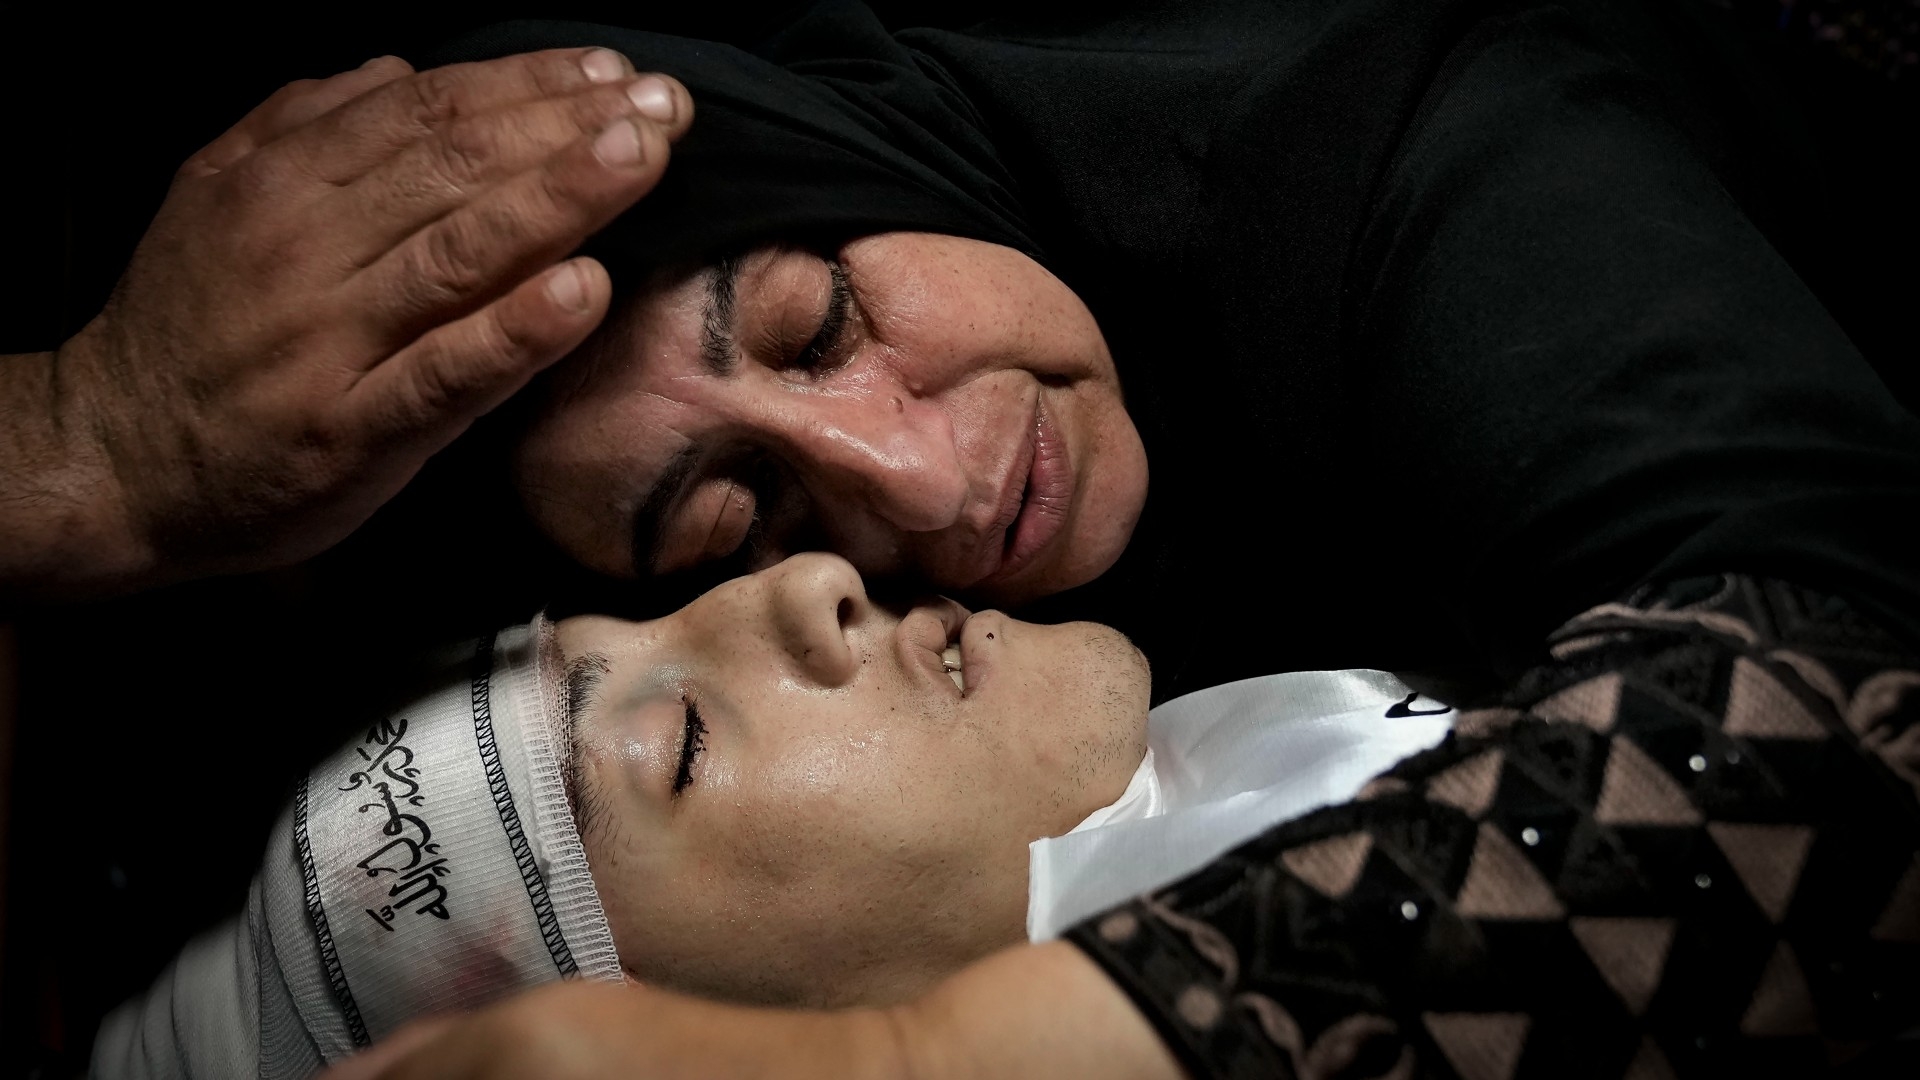 Relatives mourn over the body of a 19-year-old Palestinian killed by Israeli troops, in Jenin on 8 October (AP)